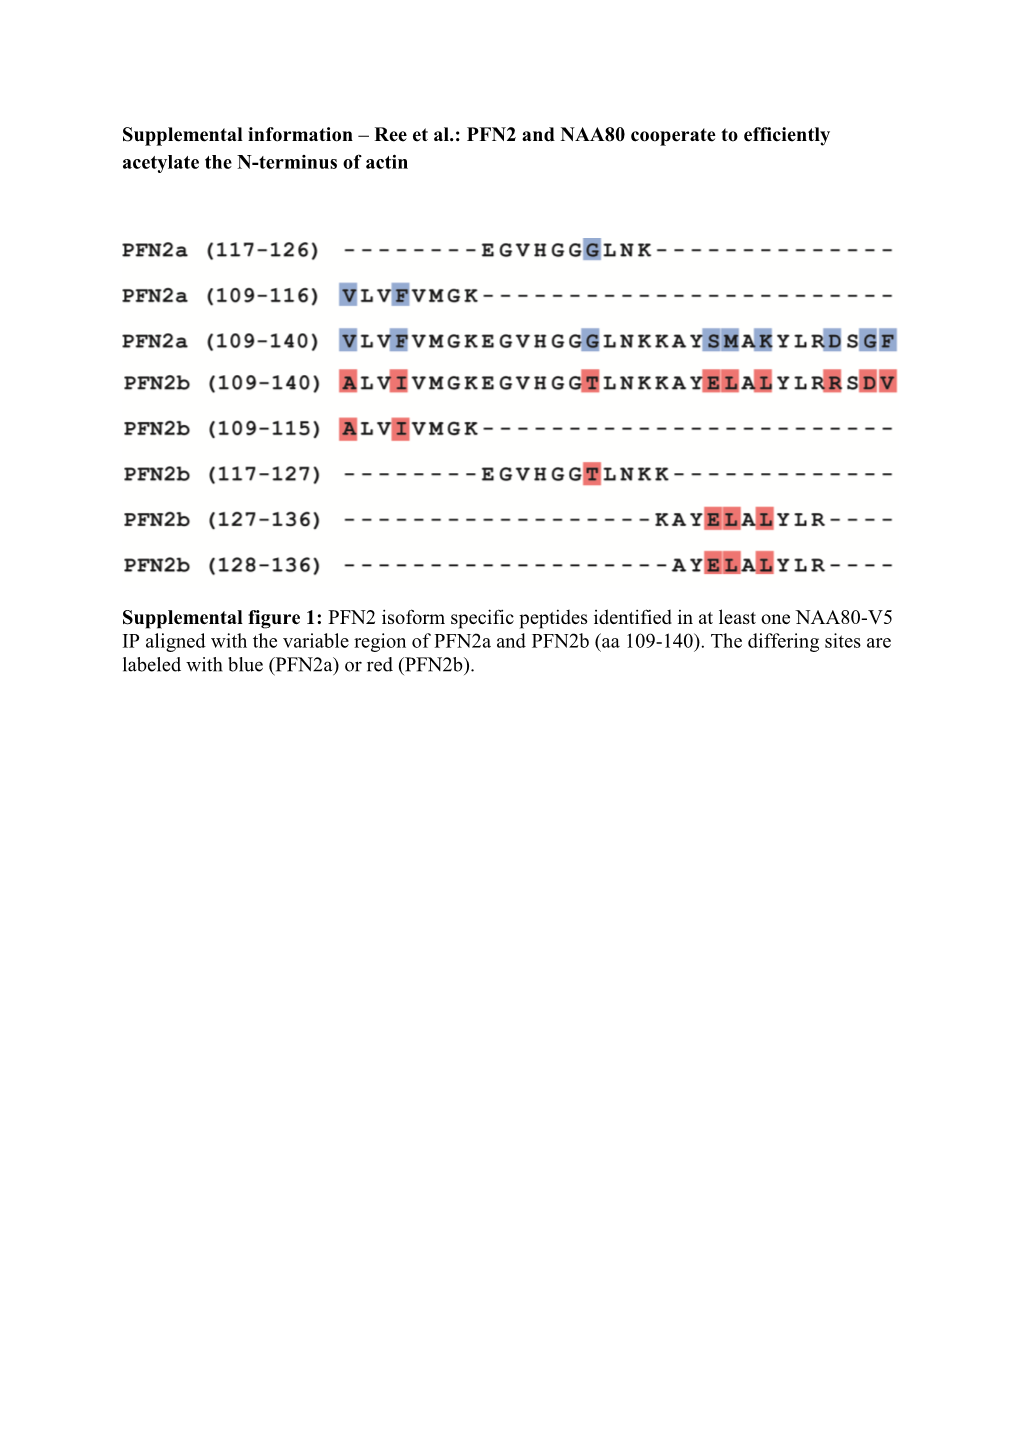 Ree Et Al.: PFN2 and NAA80 Cooperate to Efficiently Acetylate the N-Terminus of Actin